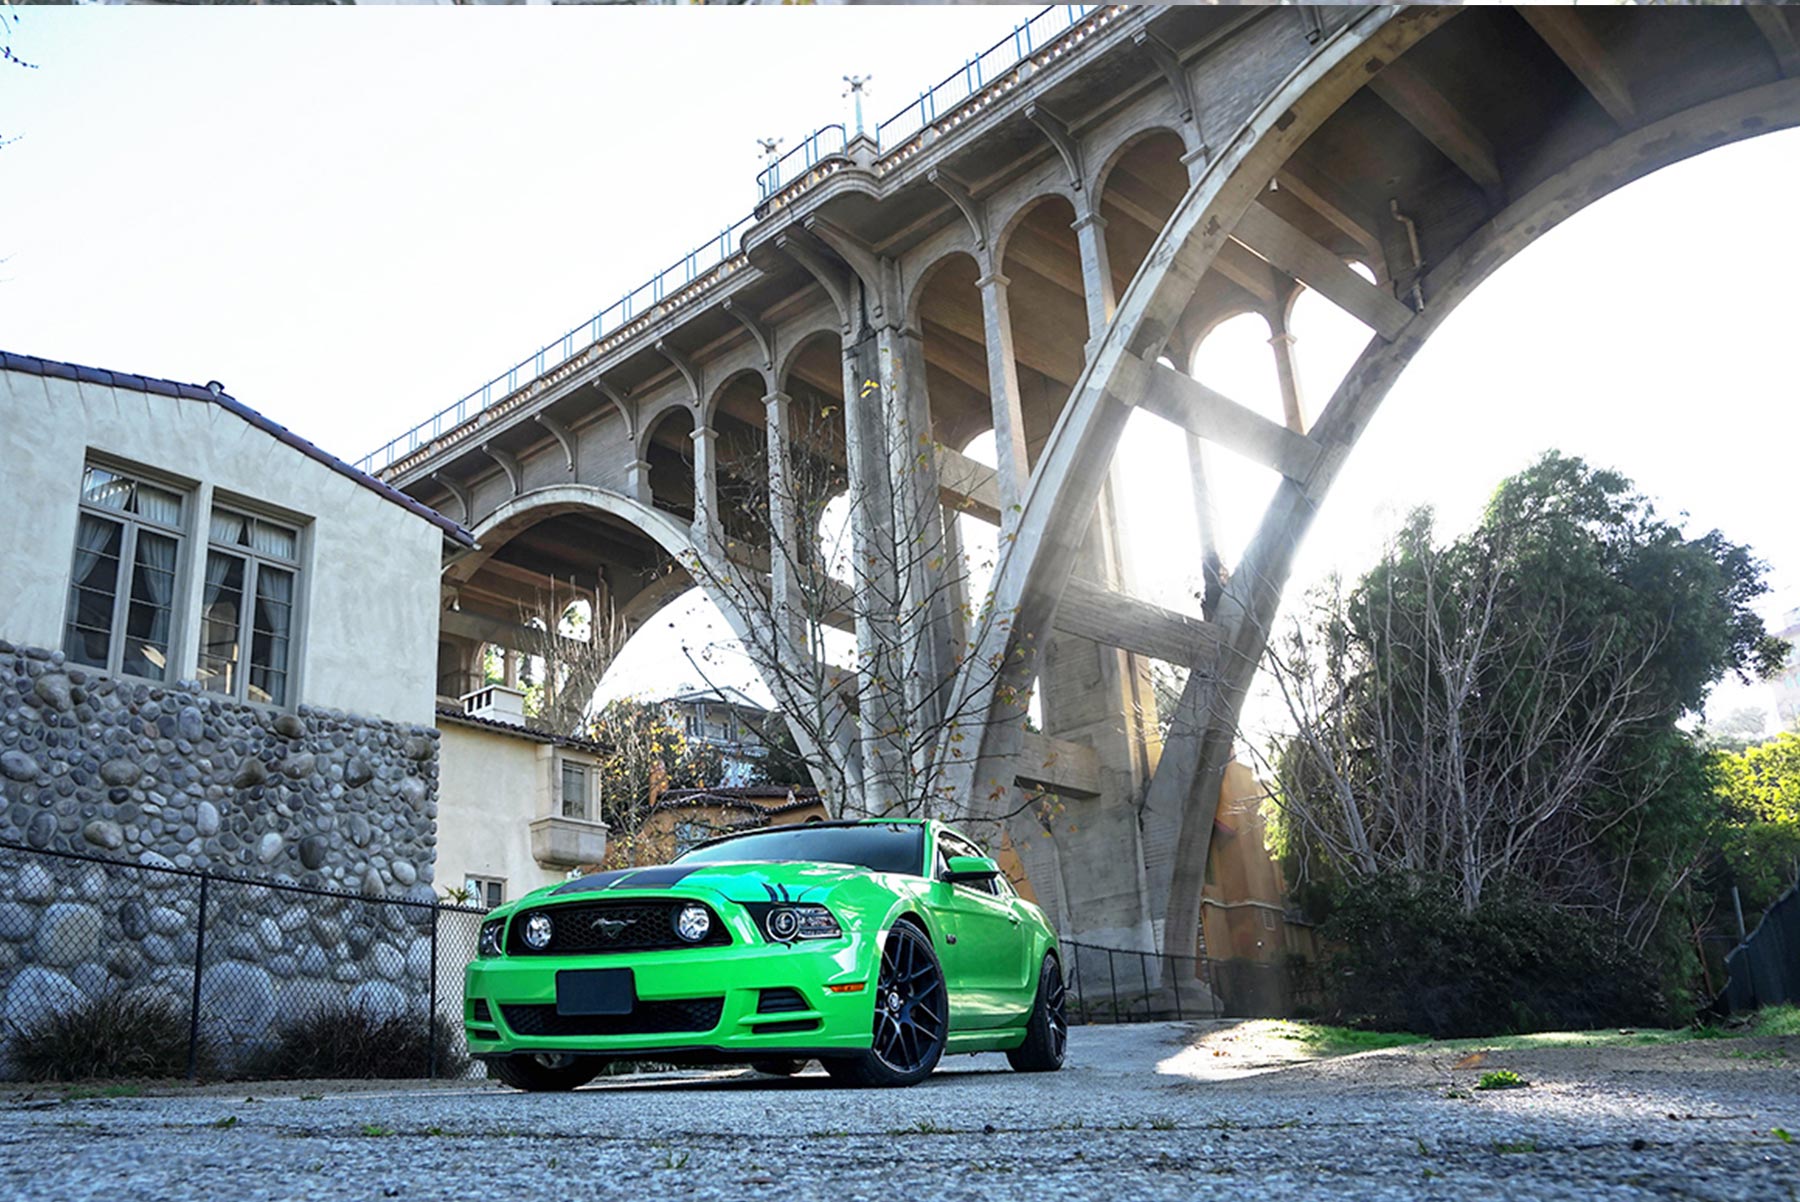 Curva Concepts C7 Aftermarket Wheels on a Green Ford Mustang GT